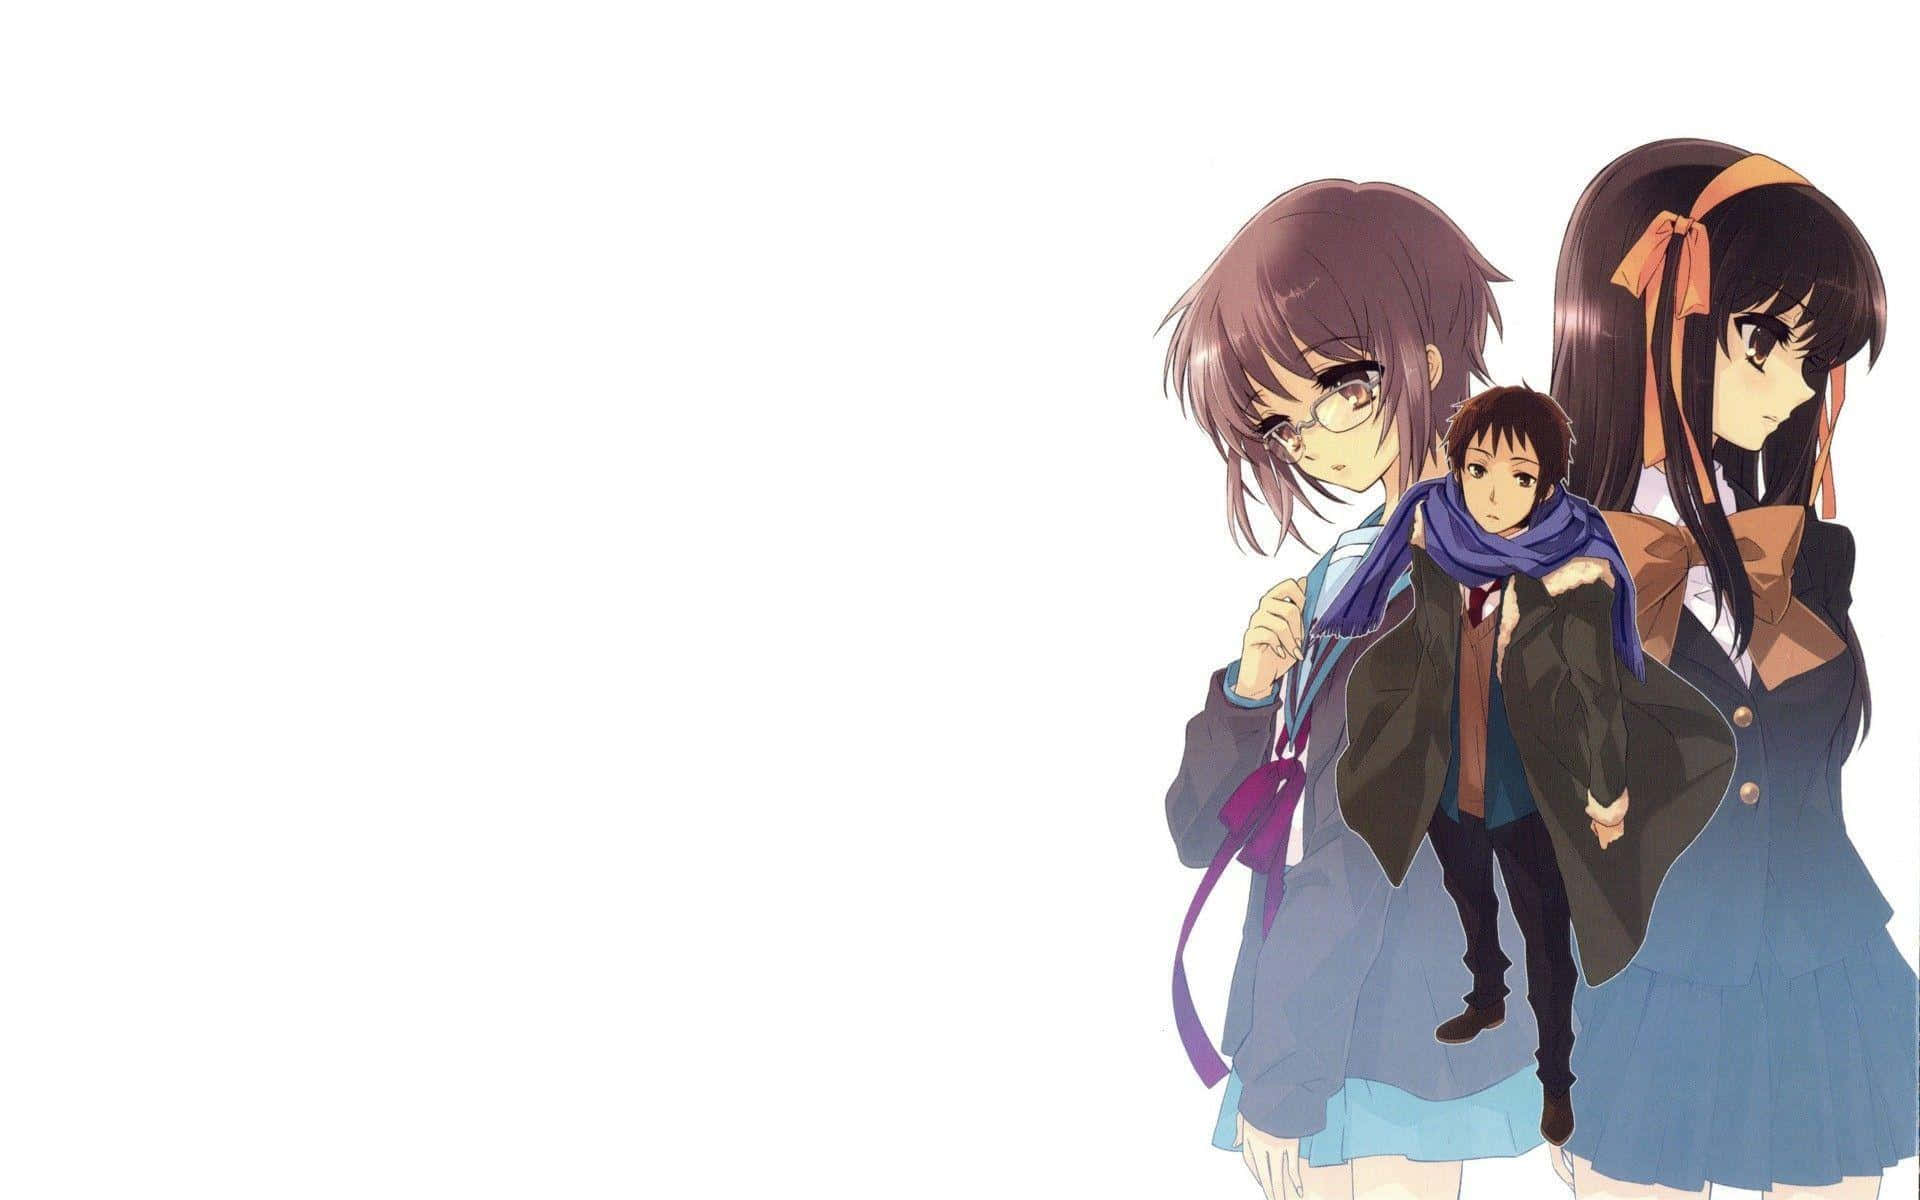 Engrossed Yuki Nagato immersed in the world of books Wallpaper